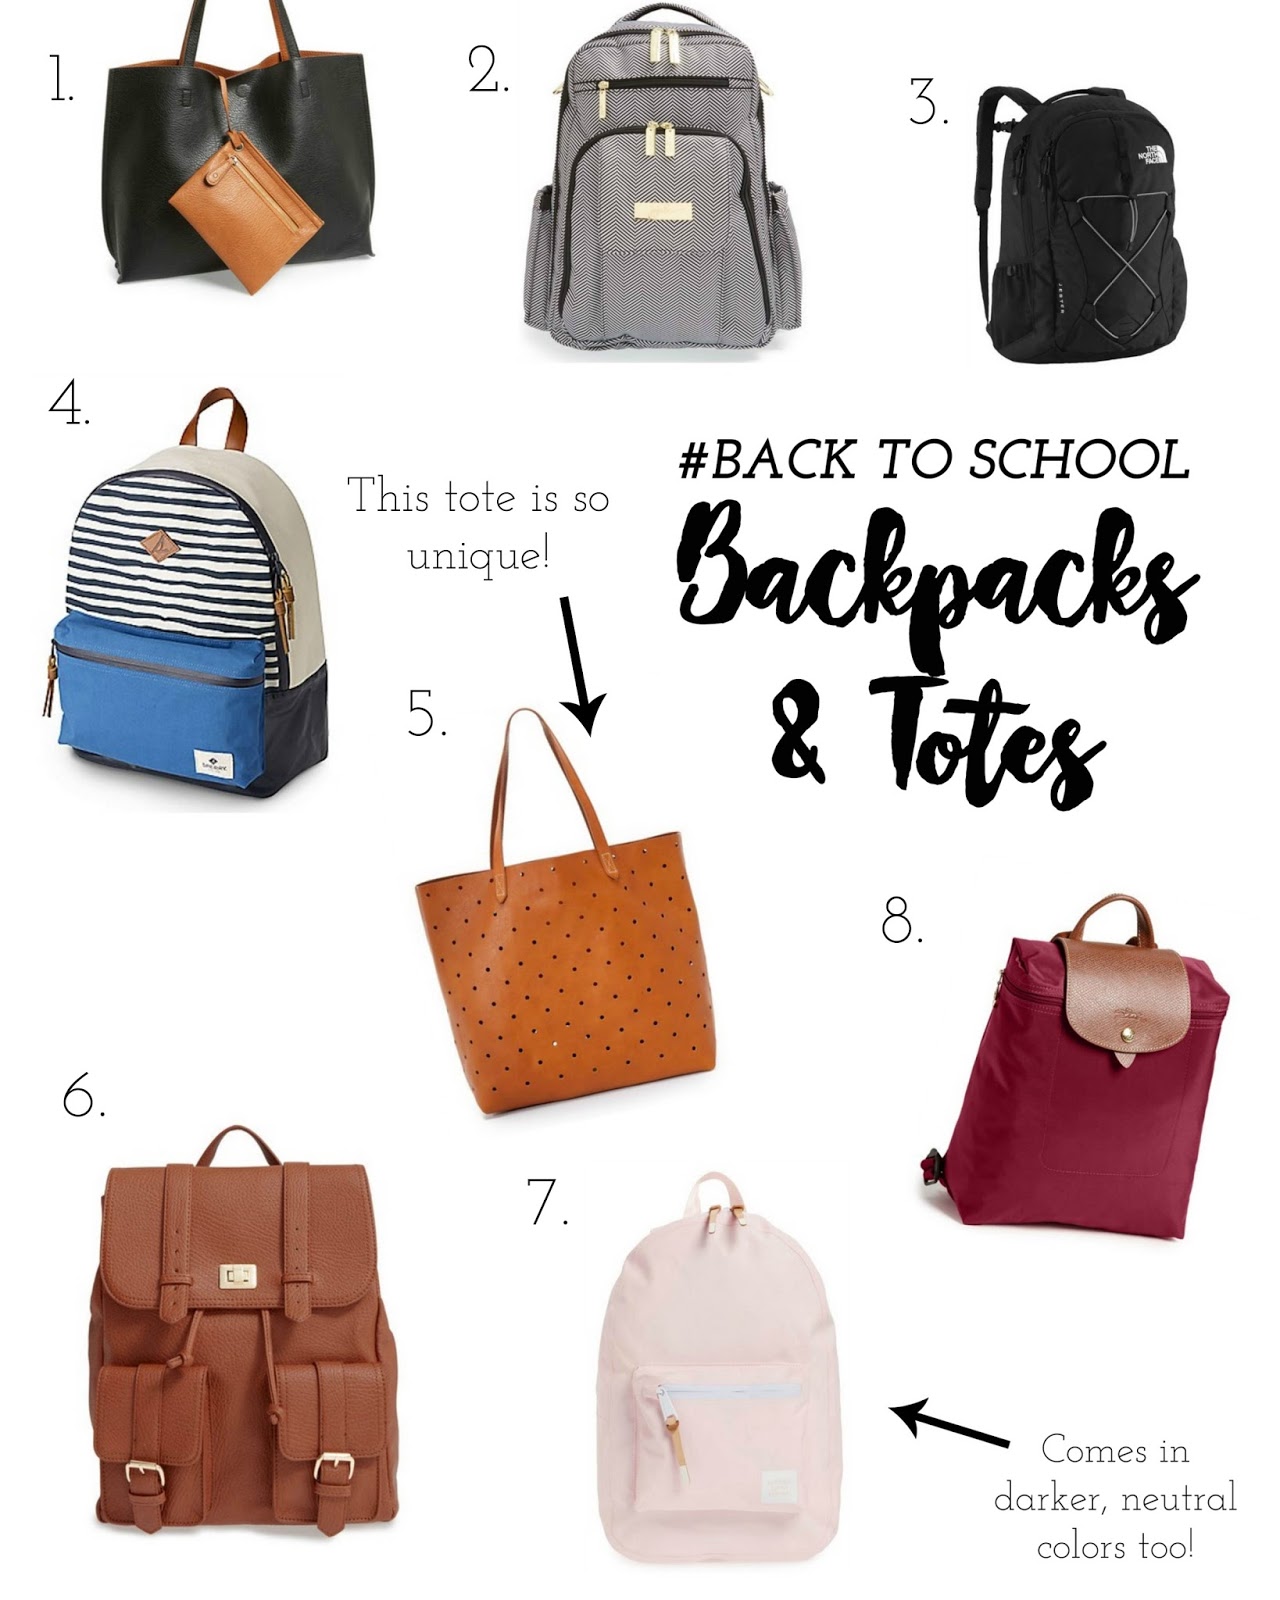 Backpacks and Totes for School